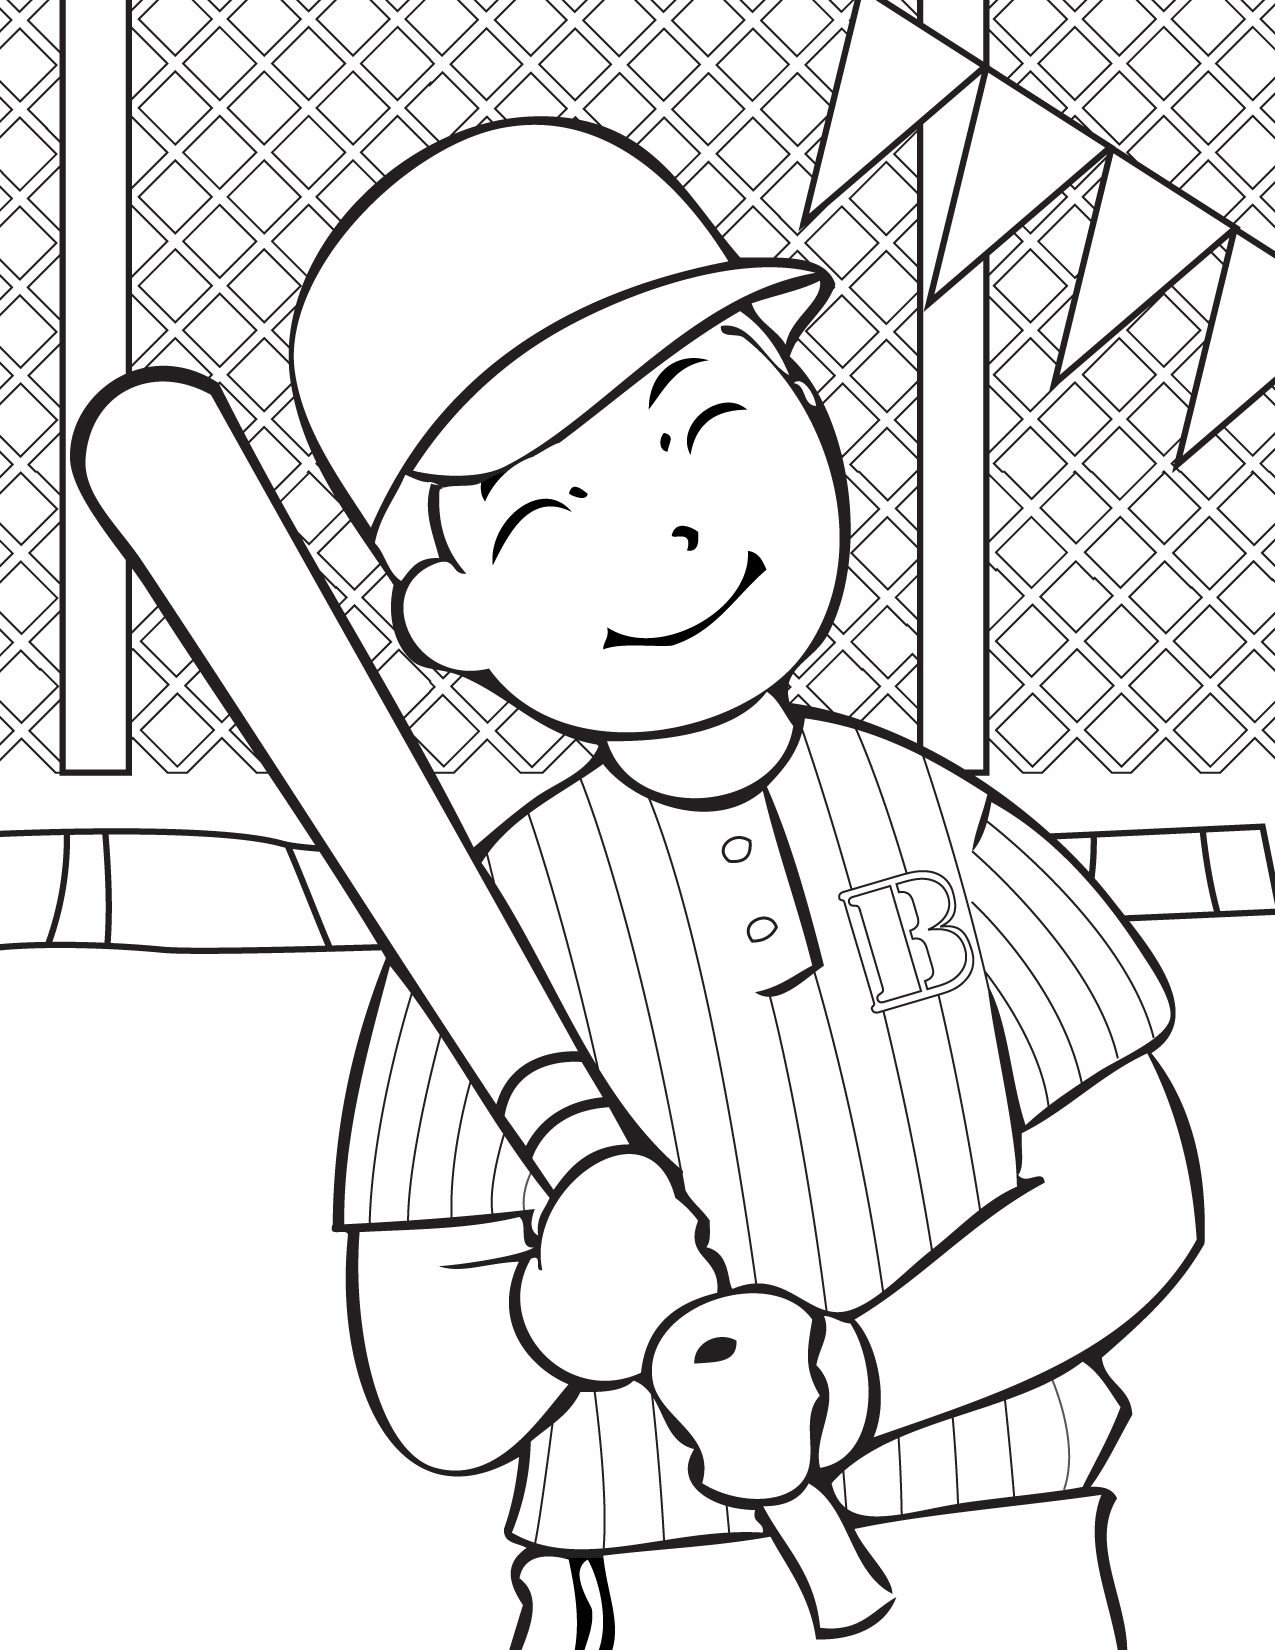 Coloring pages free baseball coloring pages for kids